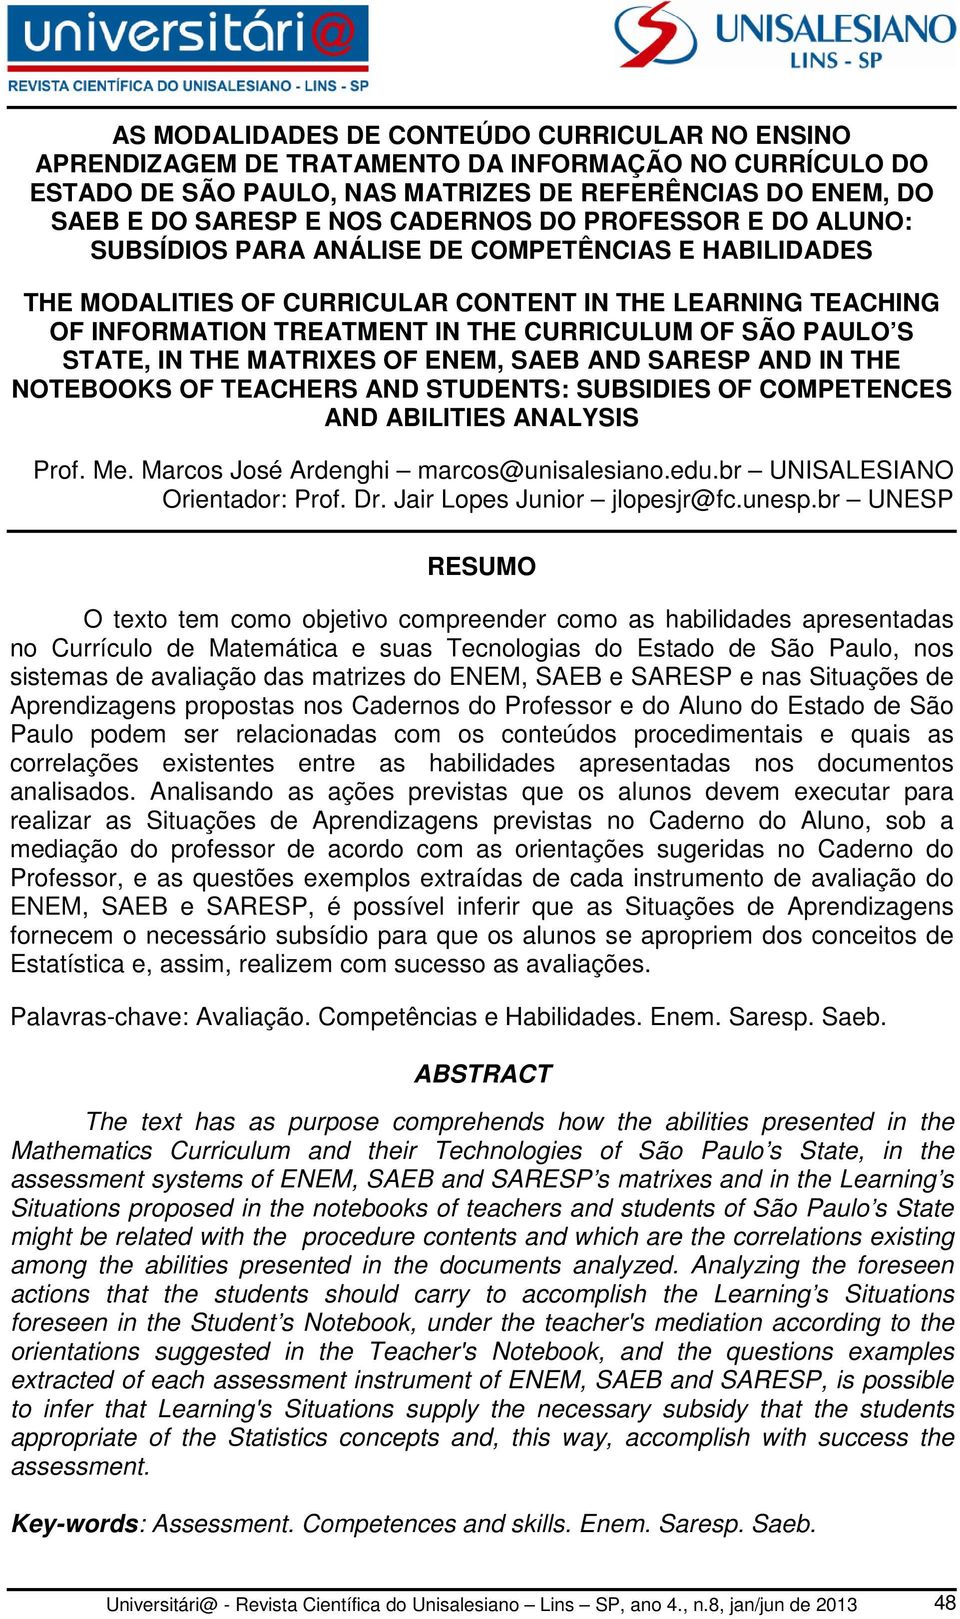 STATE, IN THE MATRIXES OF ENEM, SAEB AND SARESP AND IN THE NOTEBOOKS OF TEACHERS AND STUDENTS: SUBSIDIES OF COMPETENCES AND ABILITIES ANALYSIS Prof. Me. Marcos José Ardenghi marcos@unisalesiano.edu.